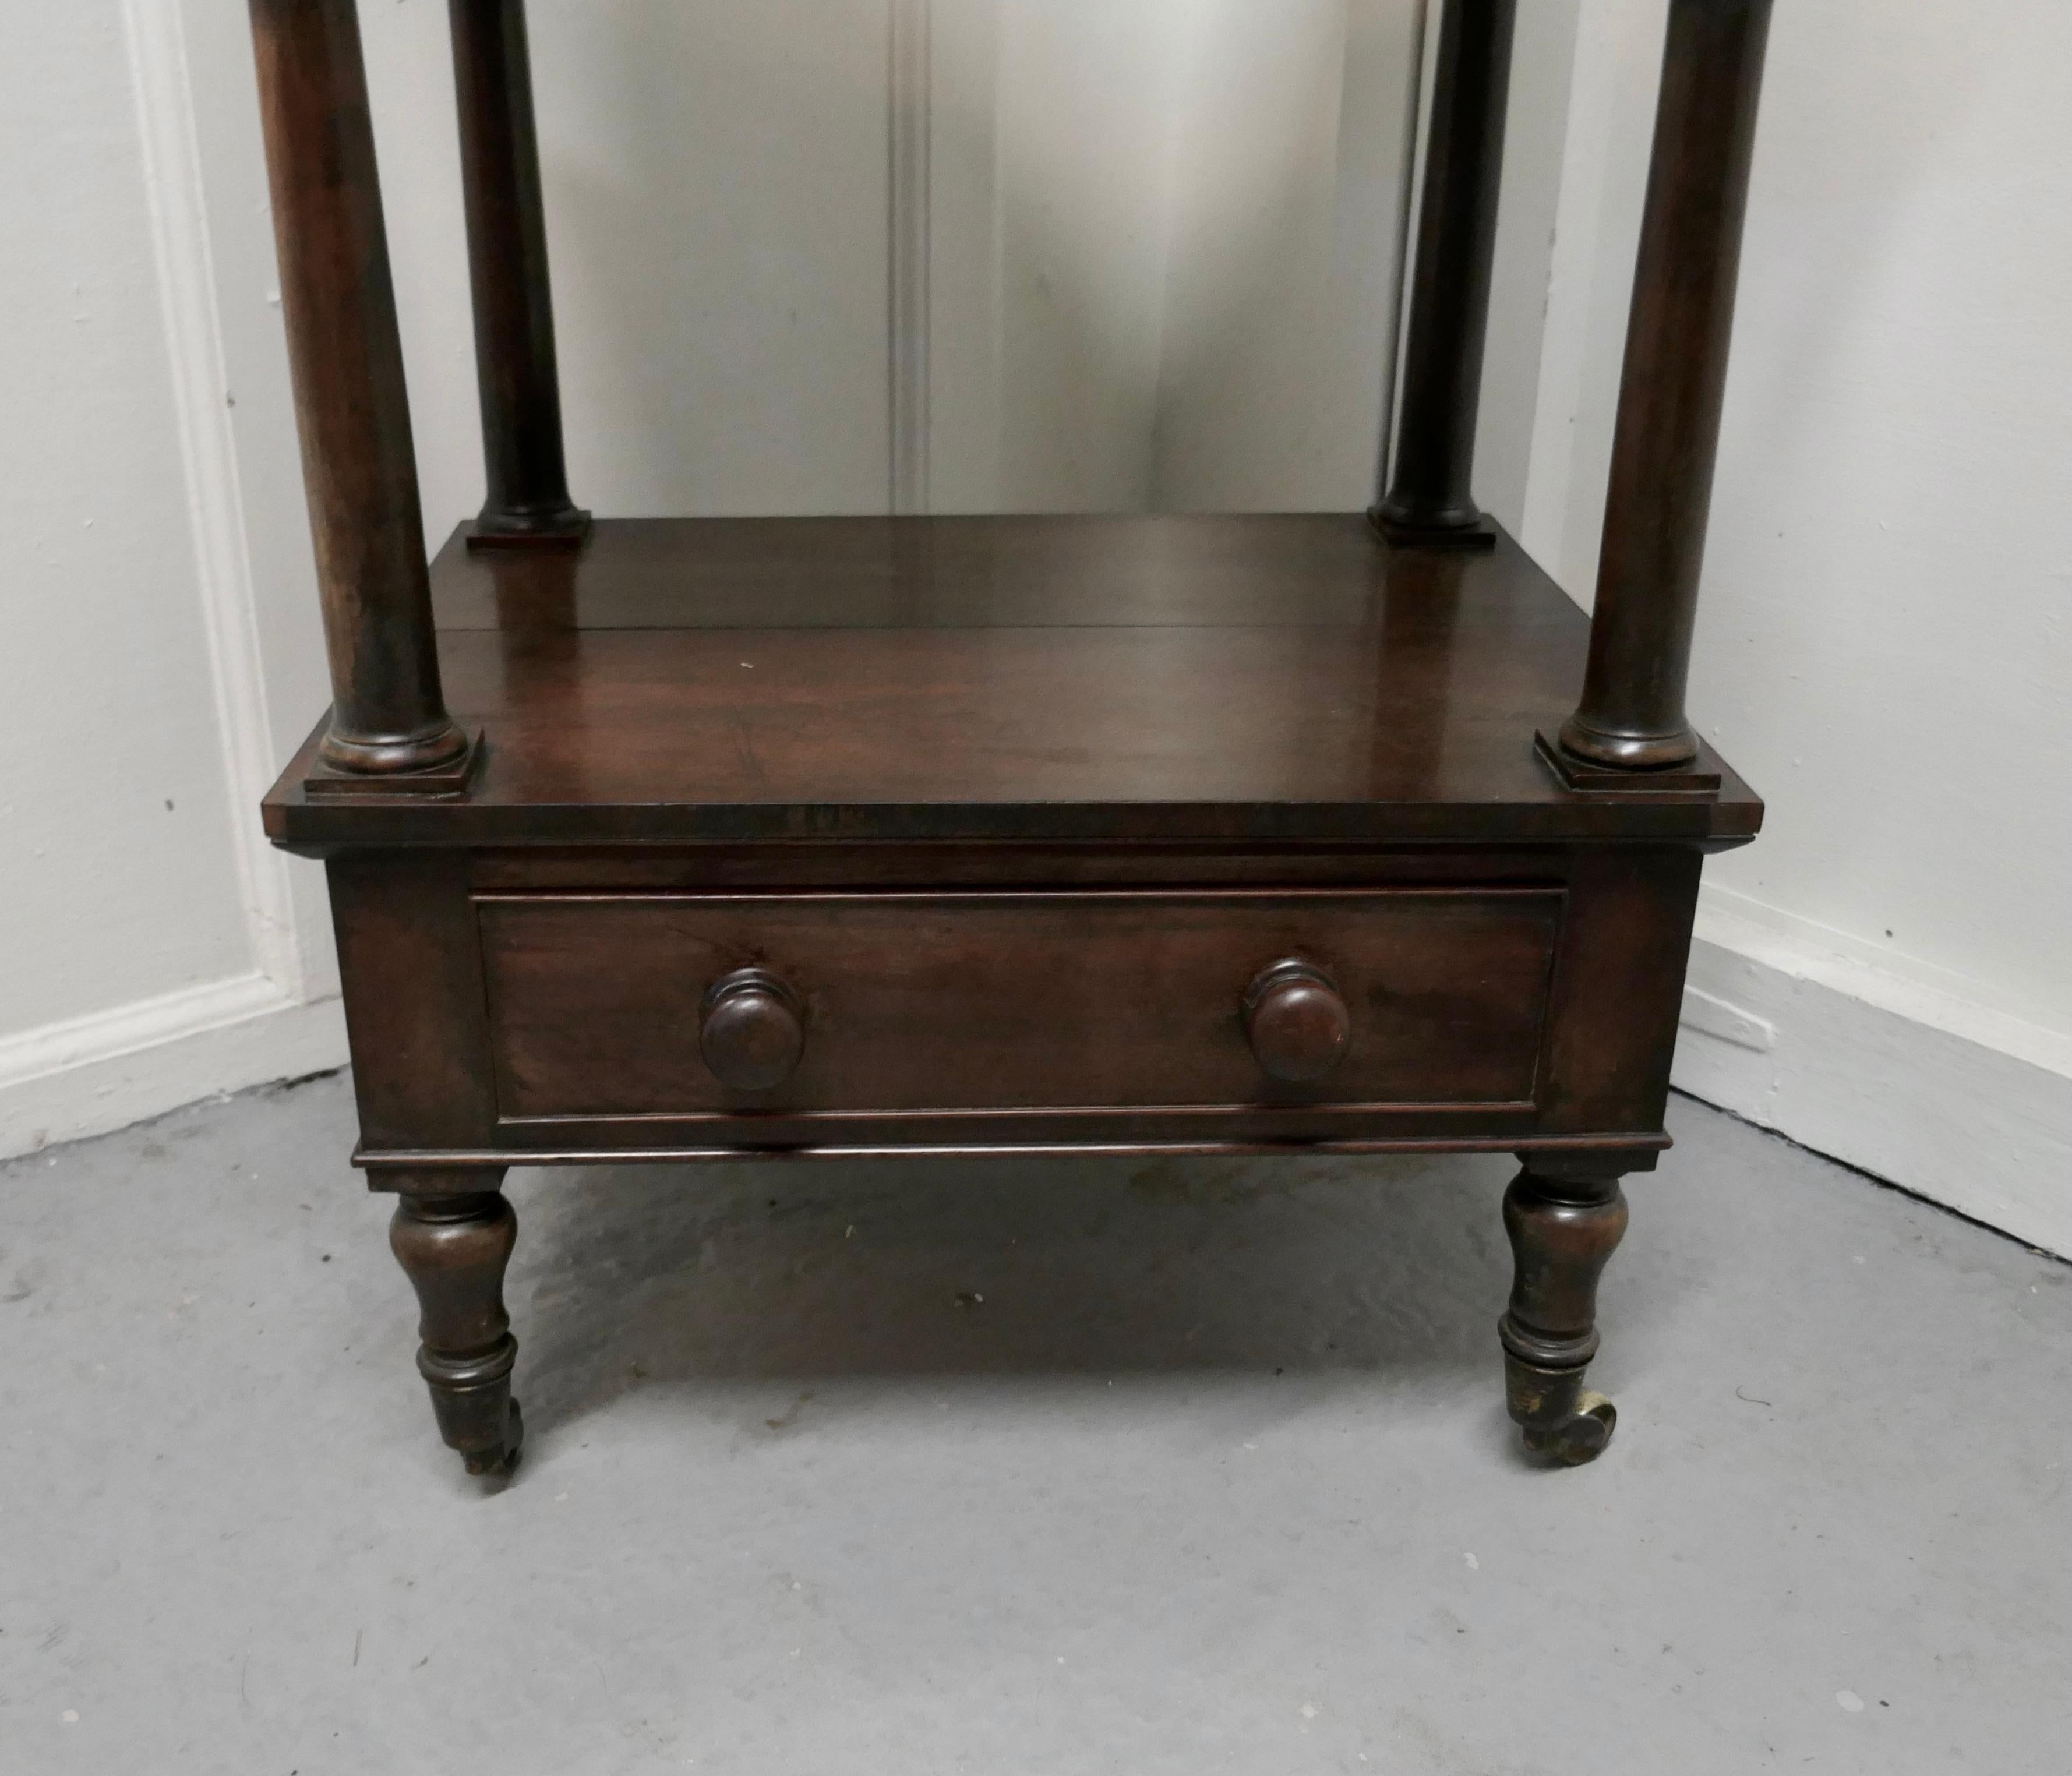 Three tier regency rosewood whatnot with drawer

This is a very good quality antique whatnot
The whatnot has three tiers with turned supports in each corner and beneath the bottom tier there is a useful drawer 
The four turned feet have the